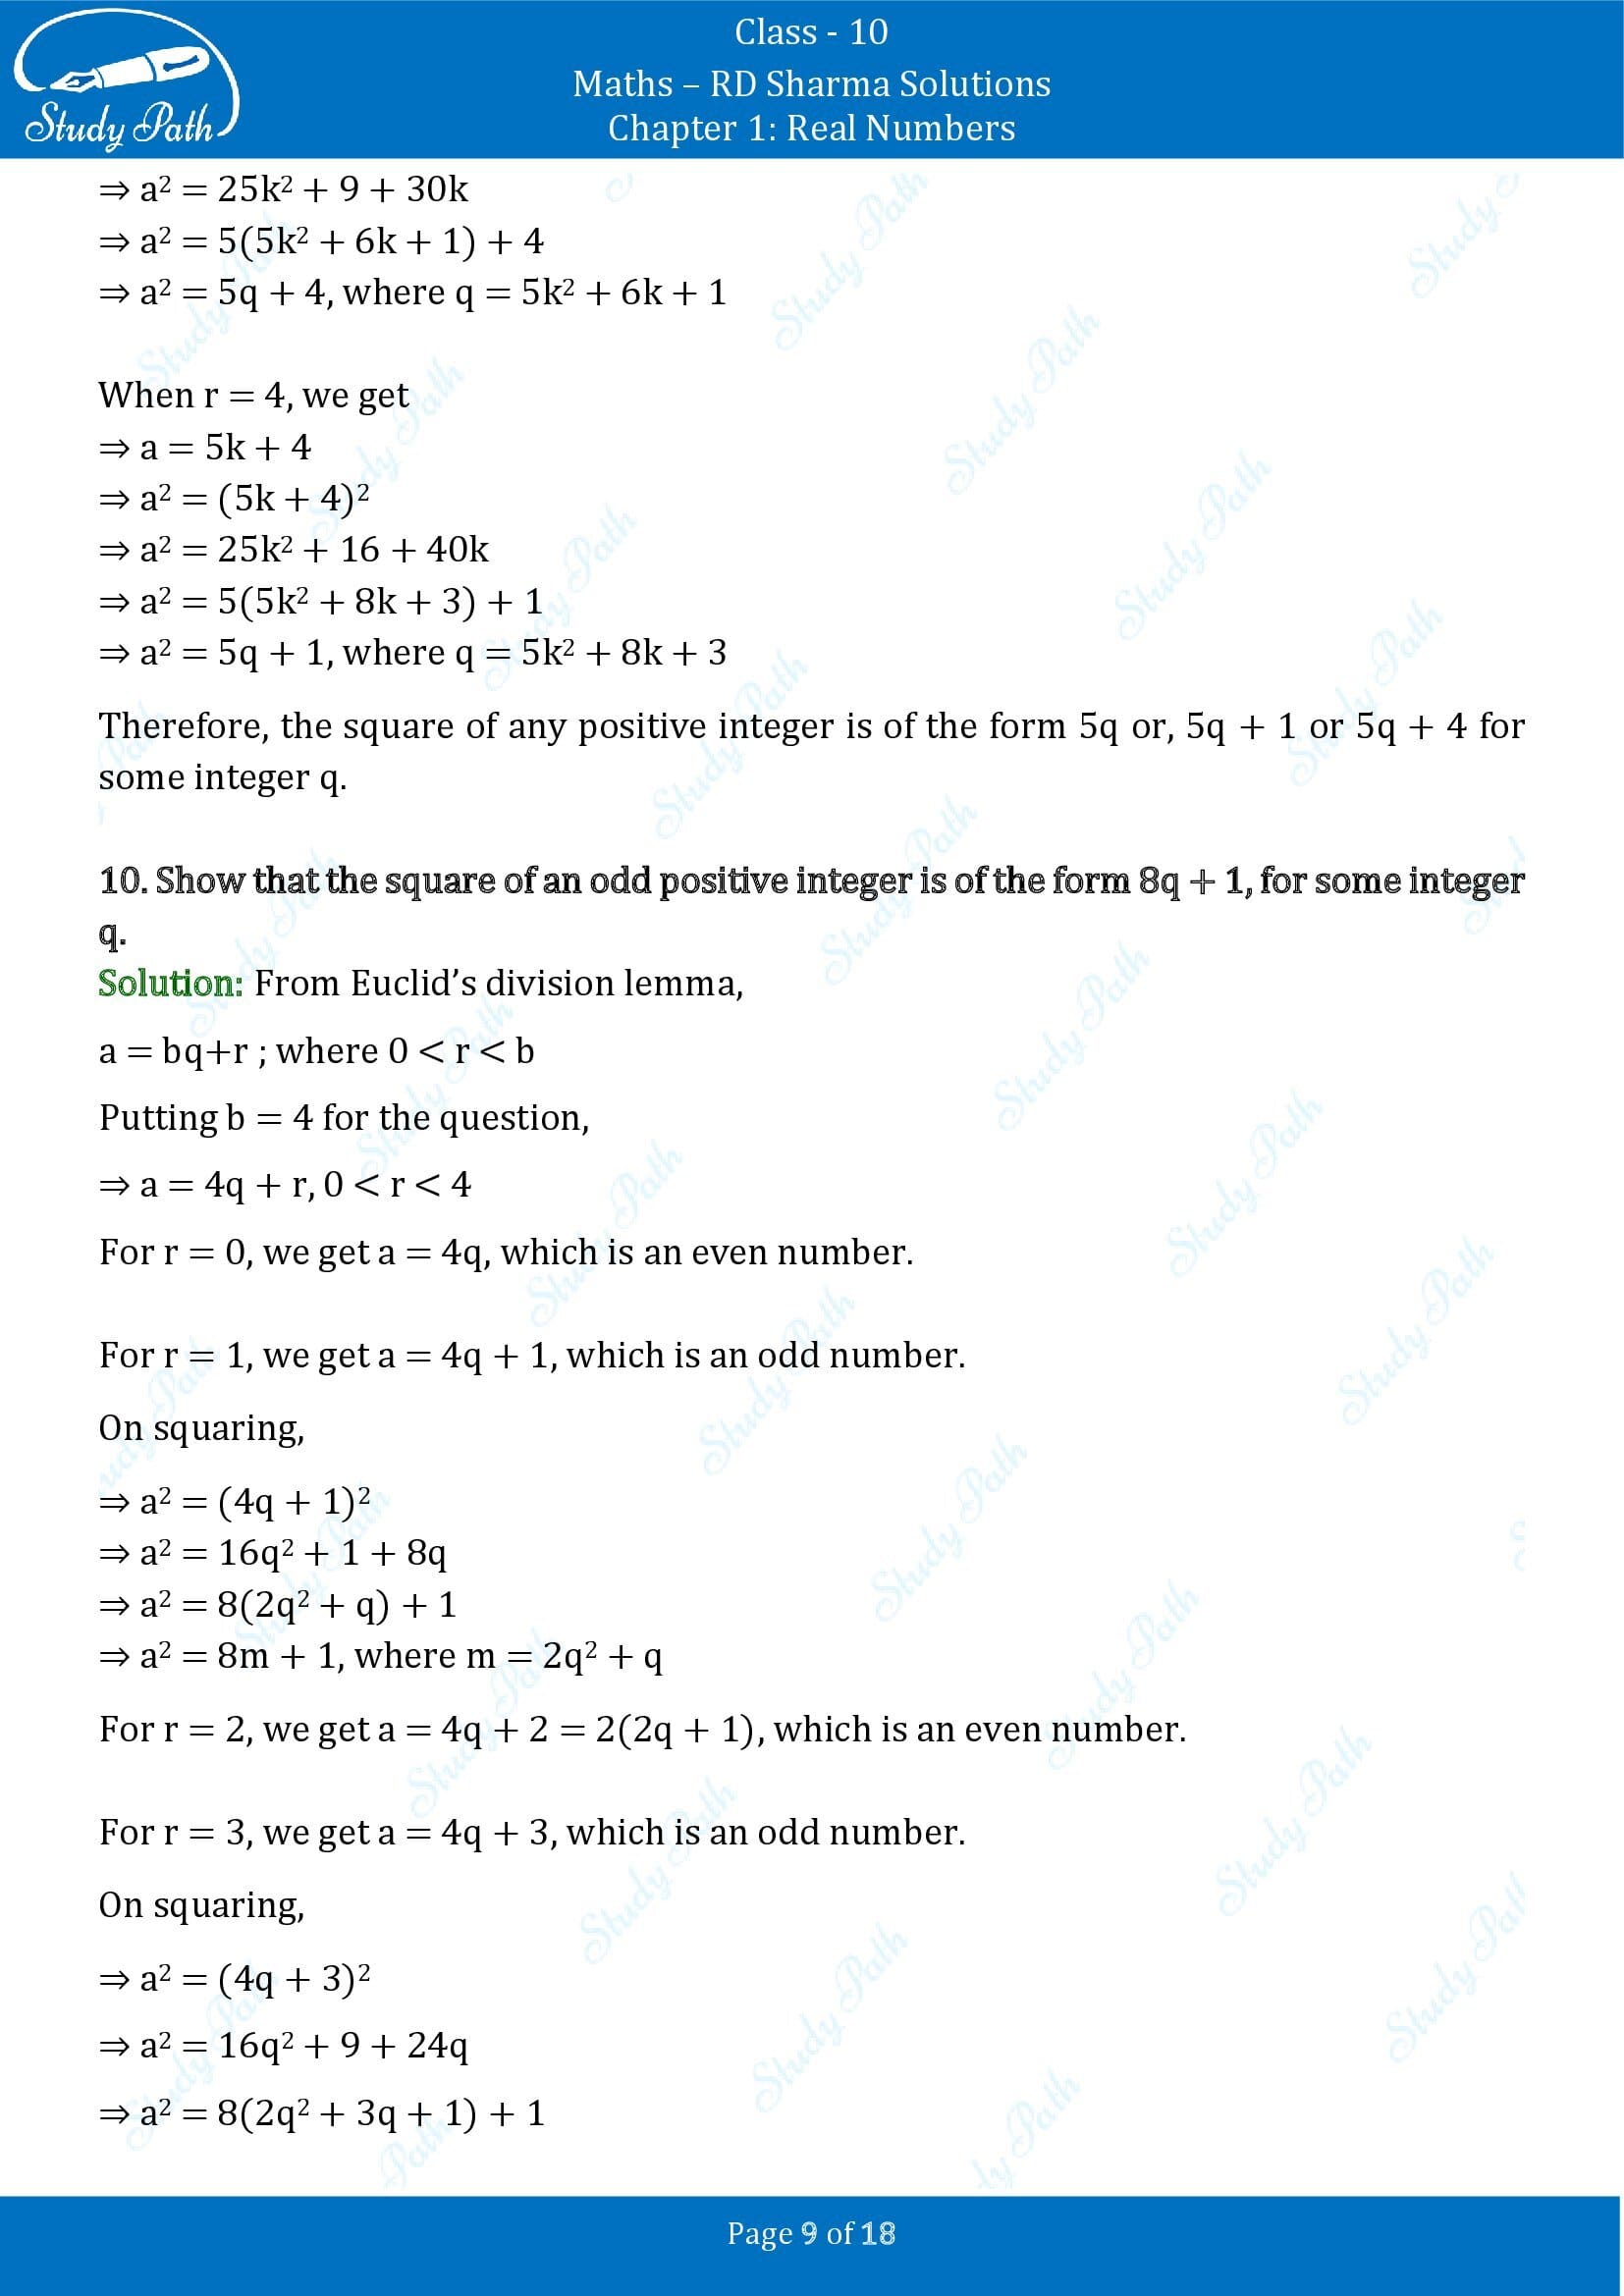 RD Sharma Solutions Class 10 Chapter 1 Real Numbers Exercise 1.1 00009